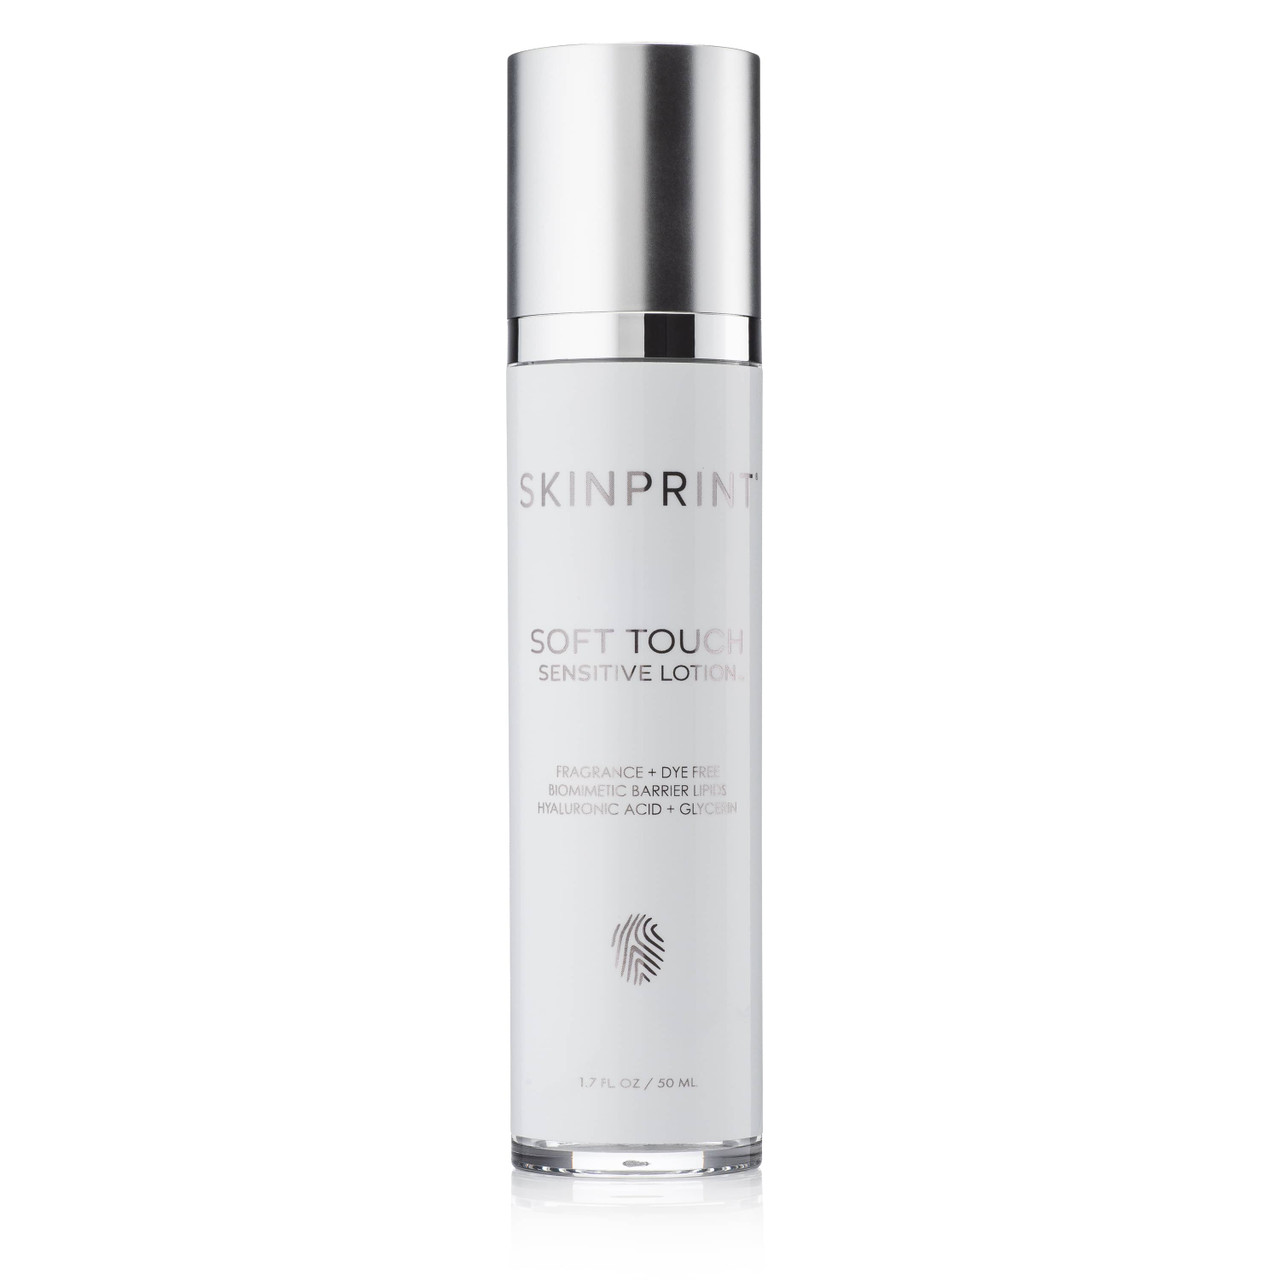 A soft touch: Hydrate your moisture-starved skin